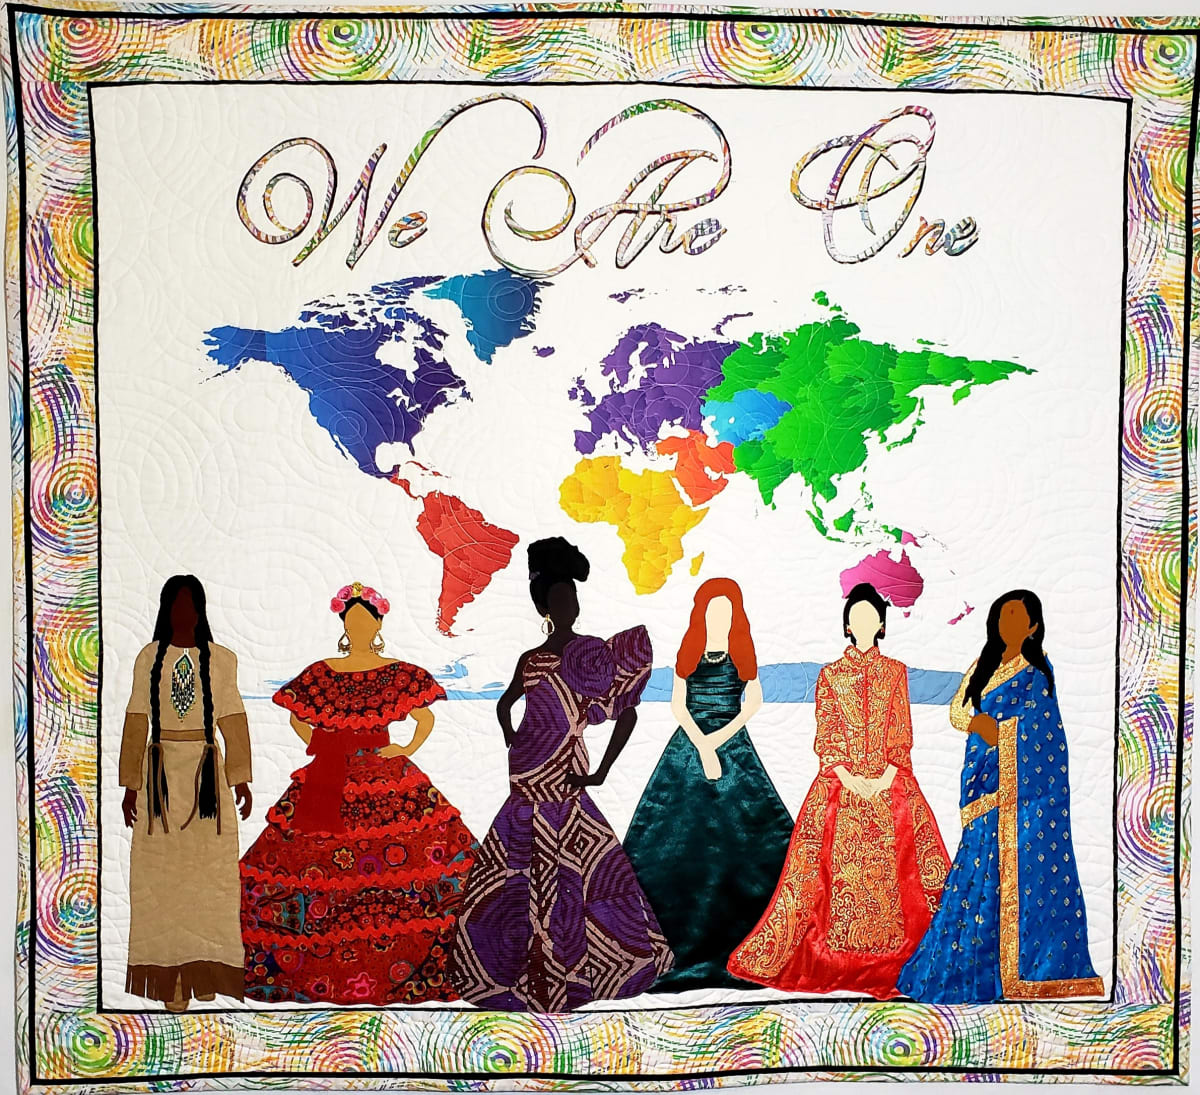 WE ARE ONE by Georgia Williams  Image: CULTURAL DIVERSITY AND INCLUSION THEME